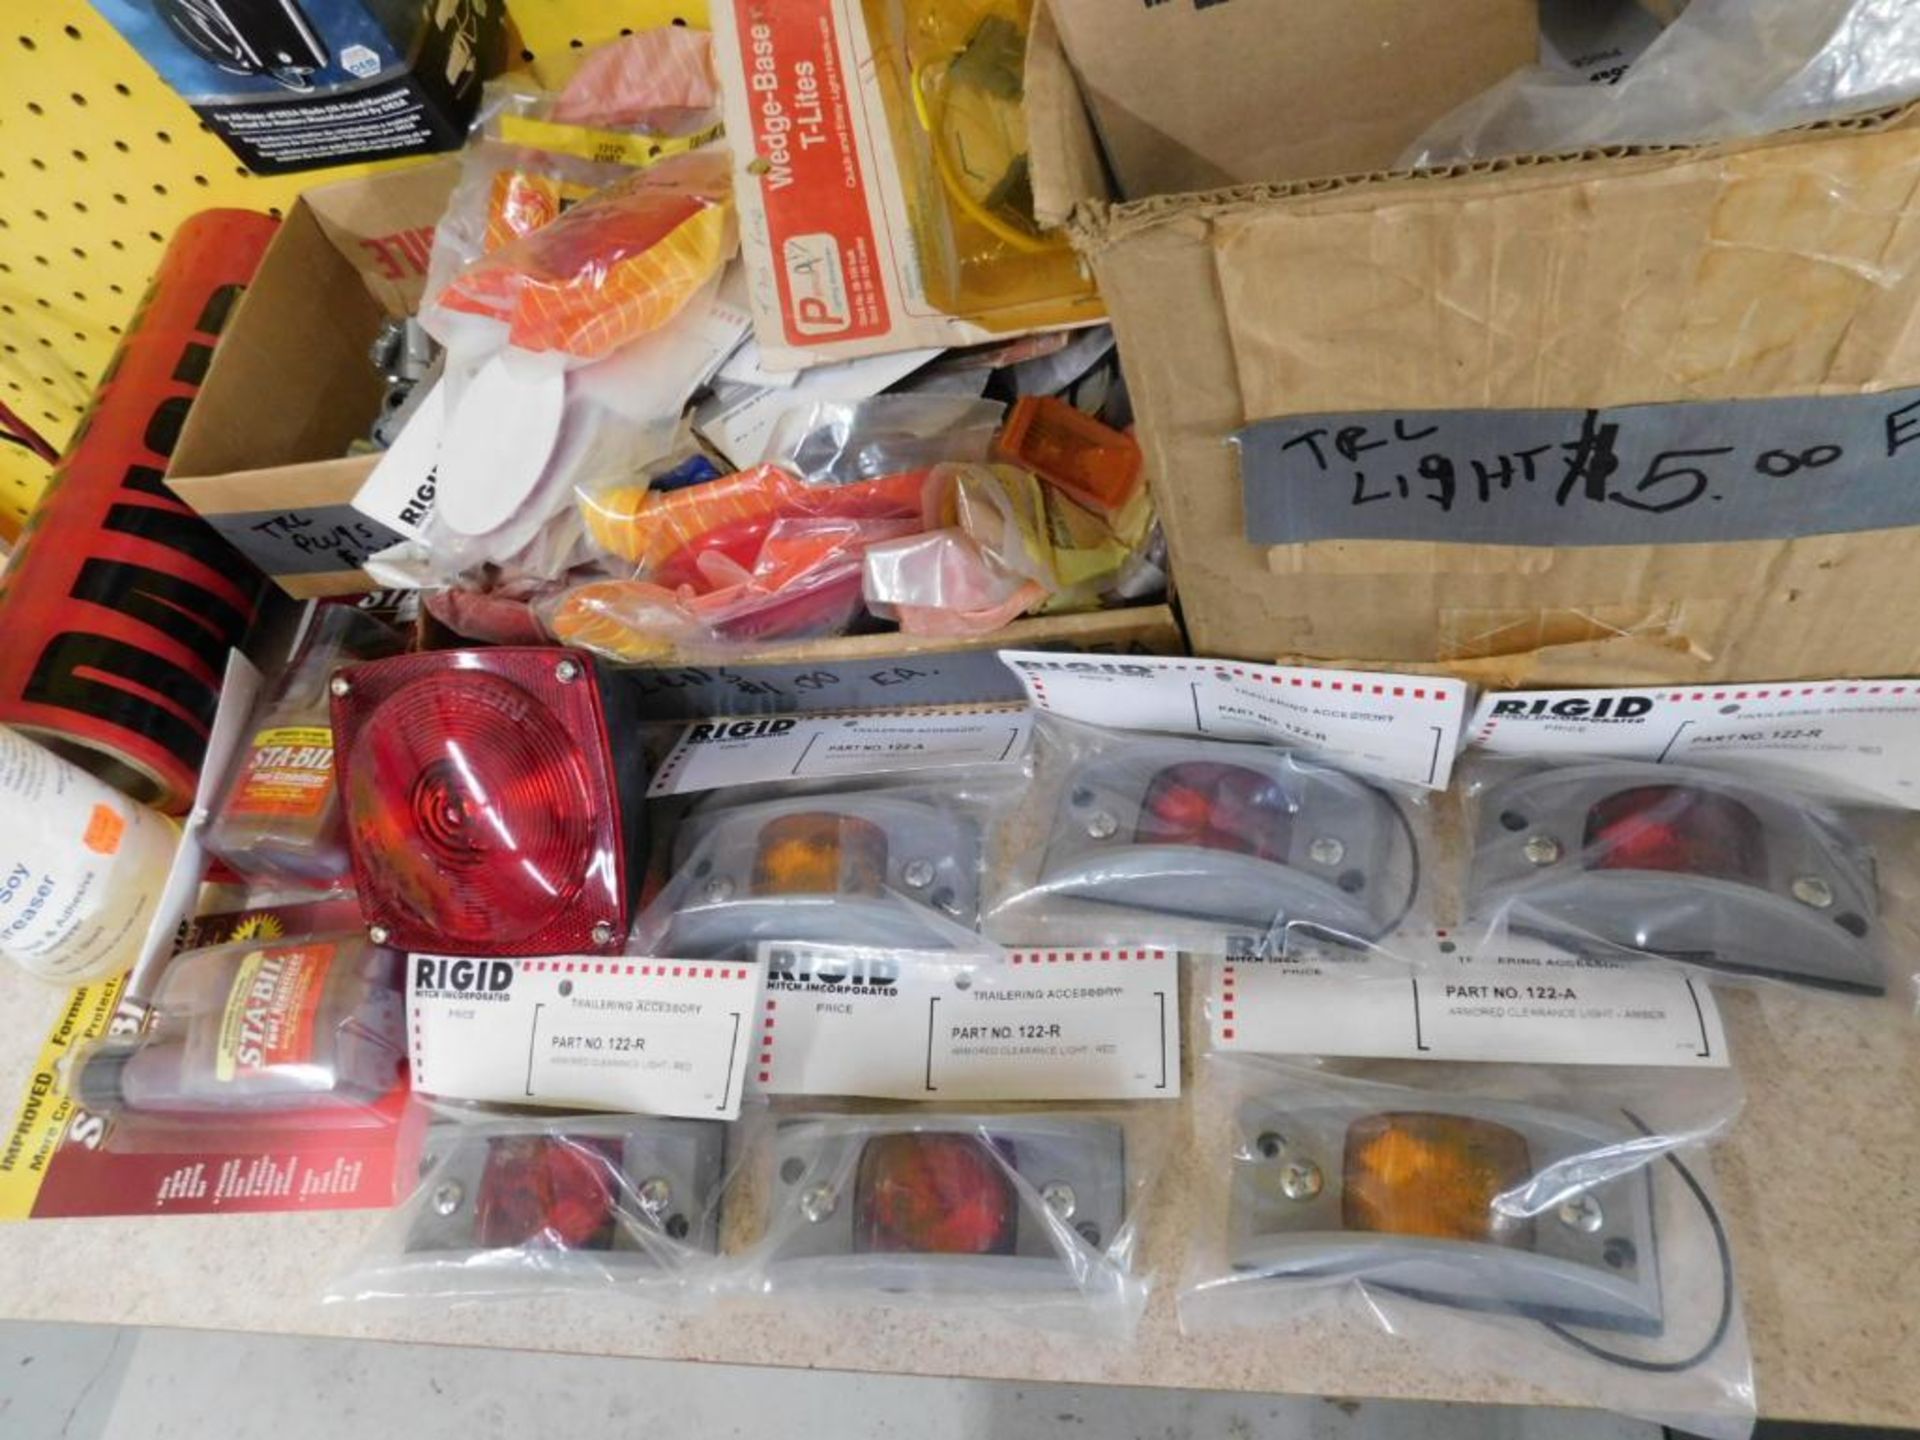 LOT: Assorted Trailer Lights & Accessories, Hitches, Ball Hitches, Pins, Light Adaptors, Plugs, etc. - Image 2 of 8